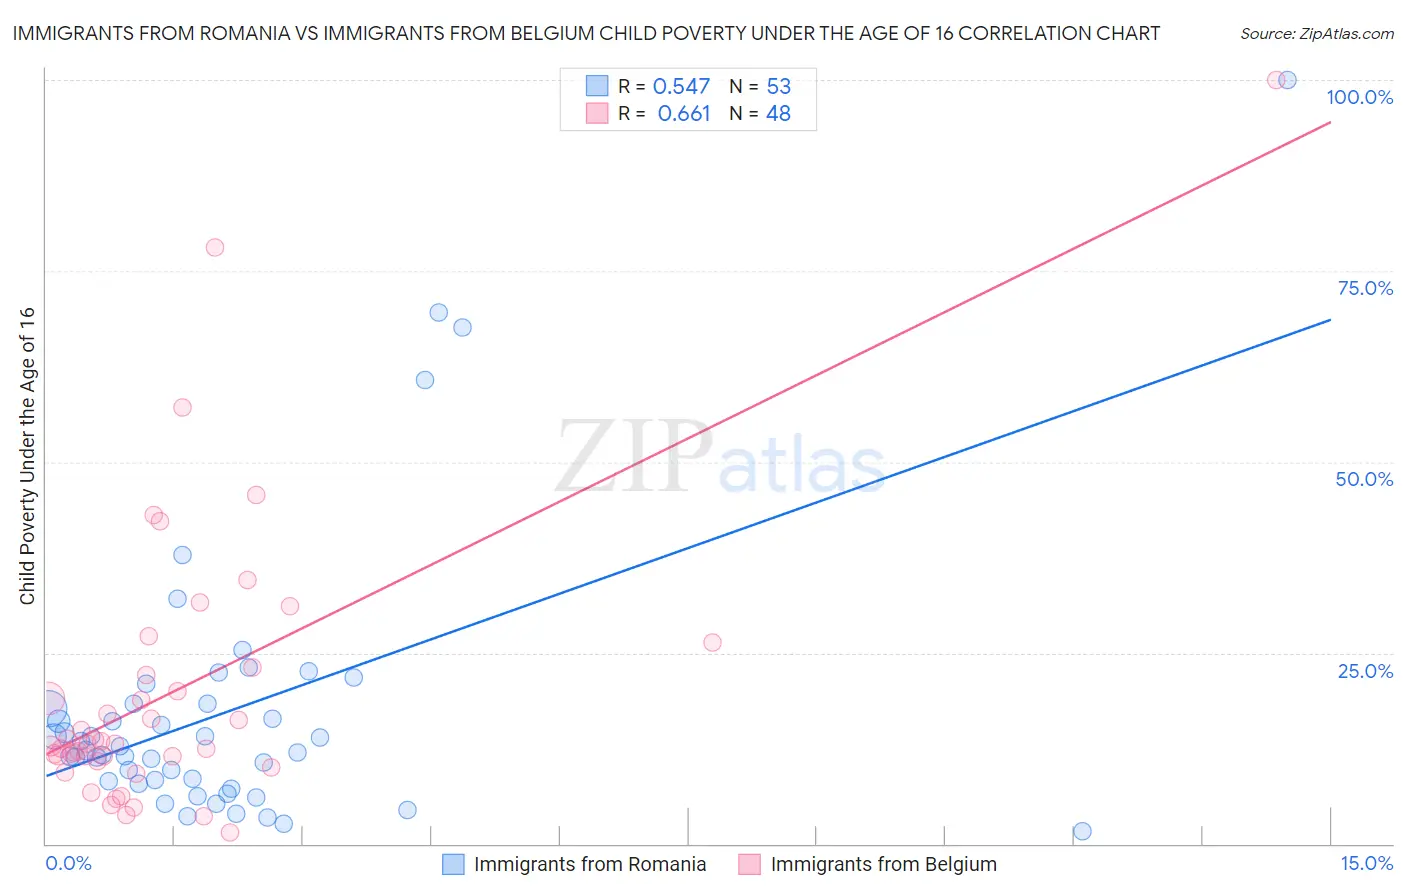 Immigrants from Romania vs Immigrants from Belgium Child Poverty Under the Age of 16